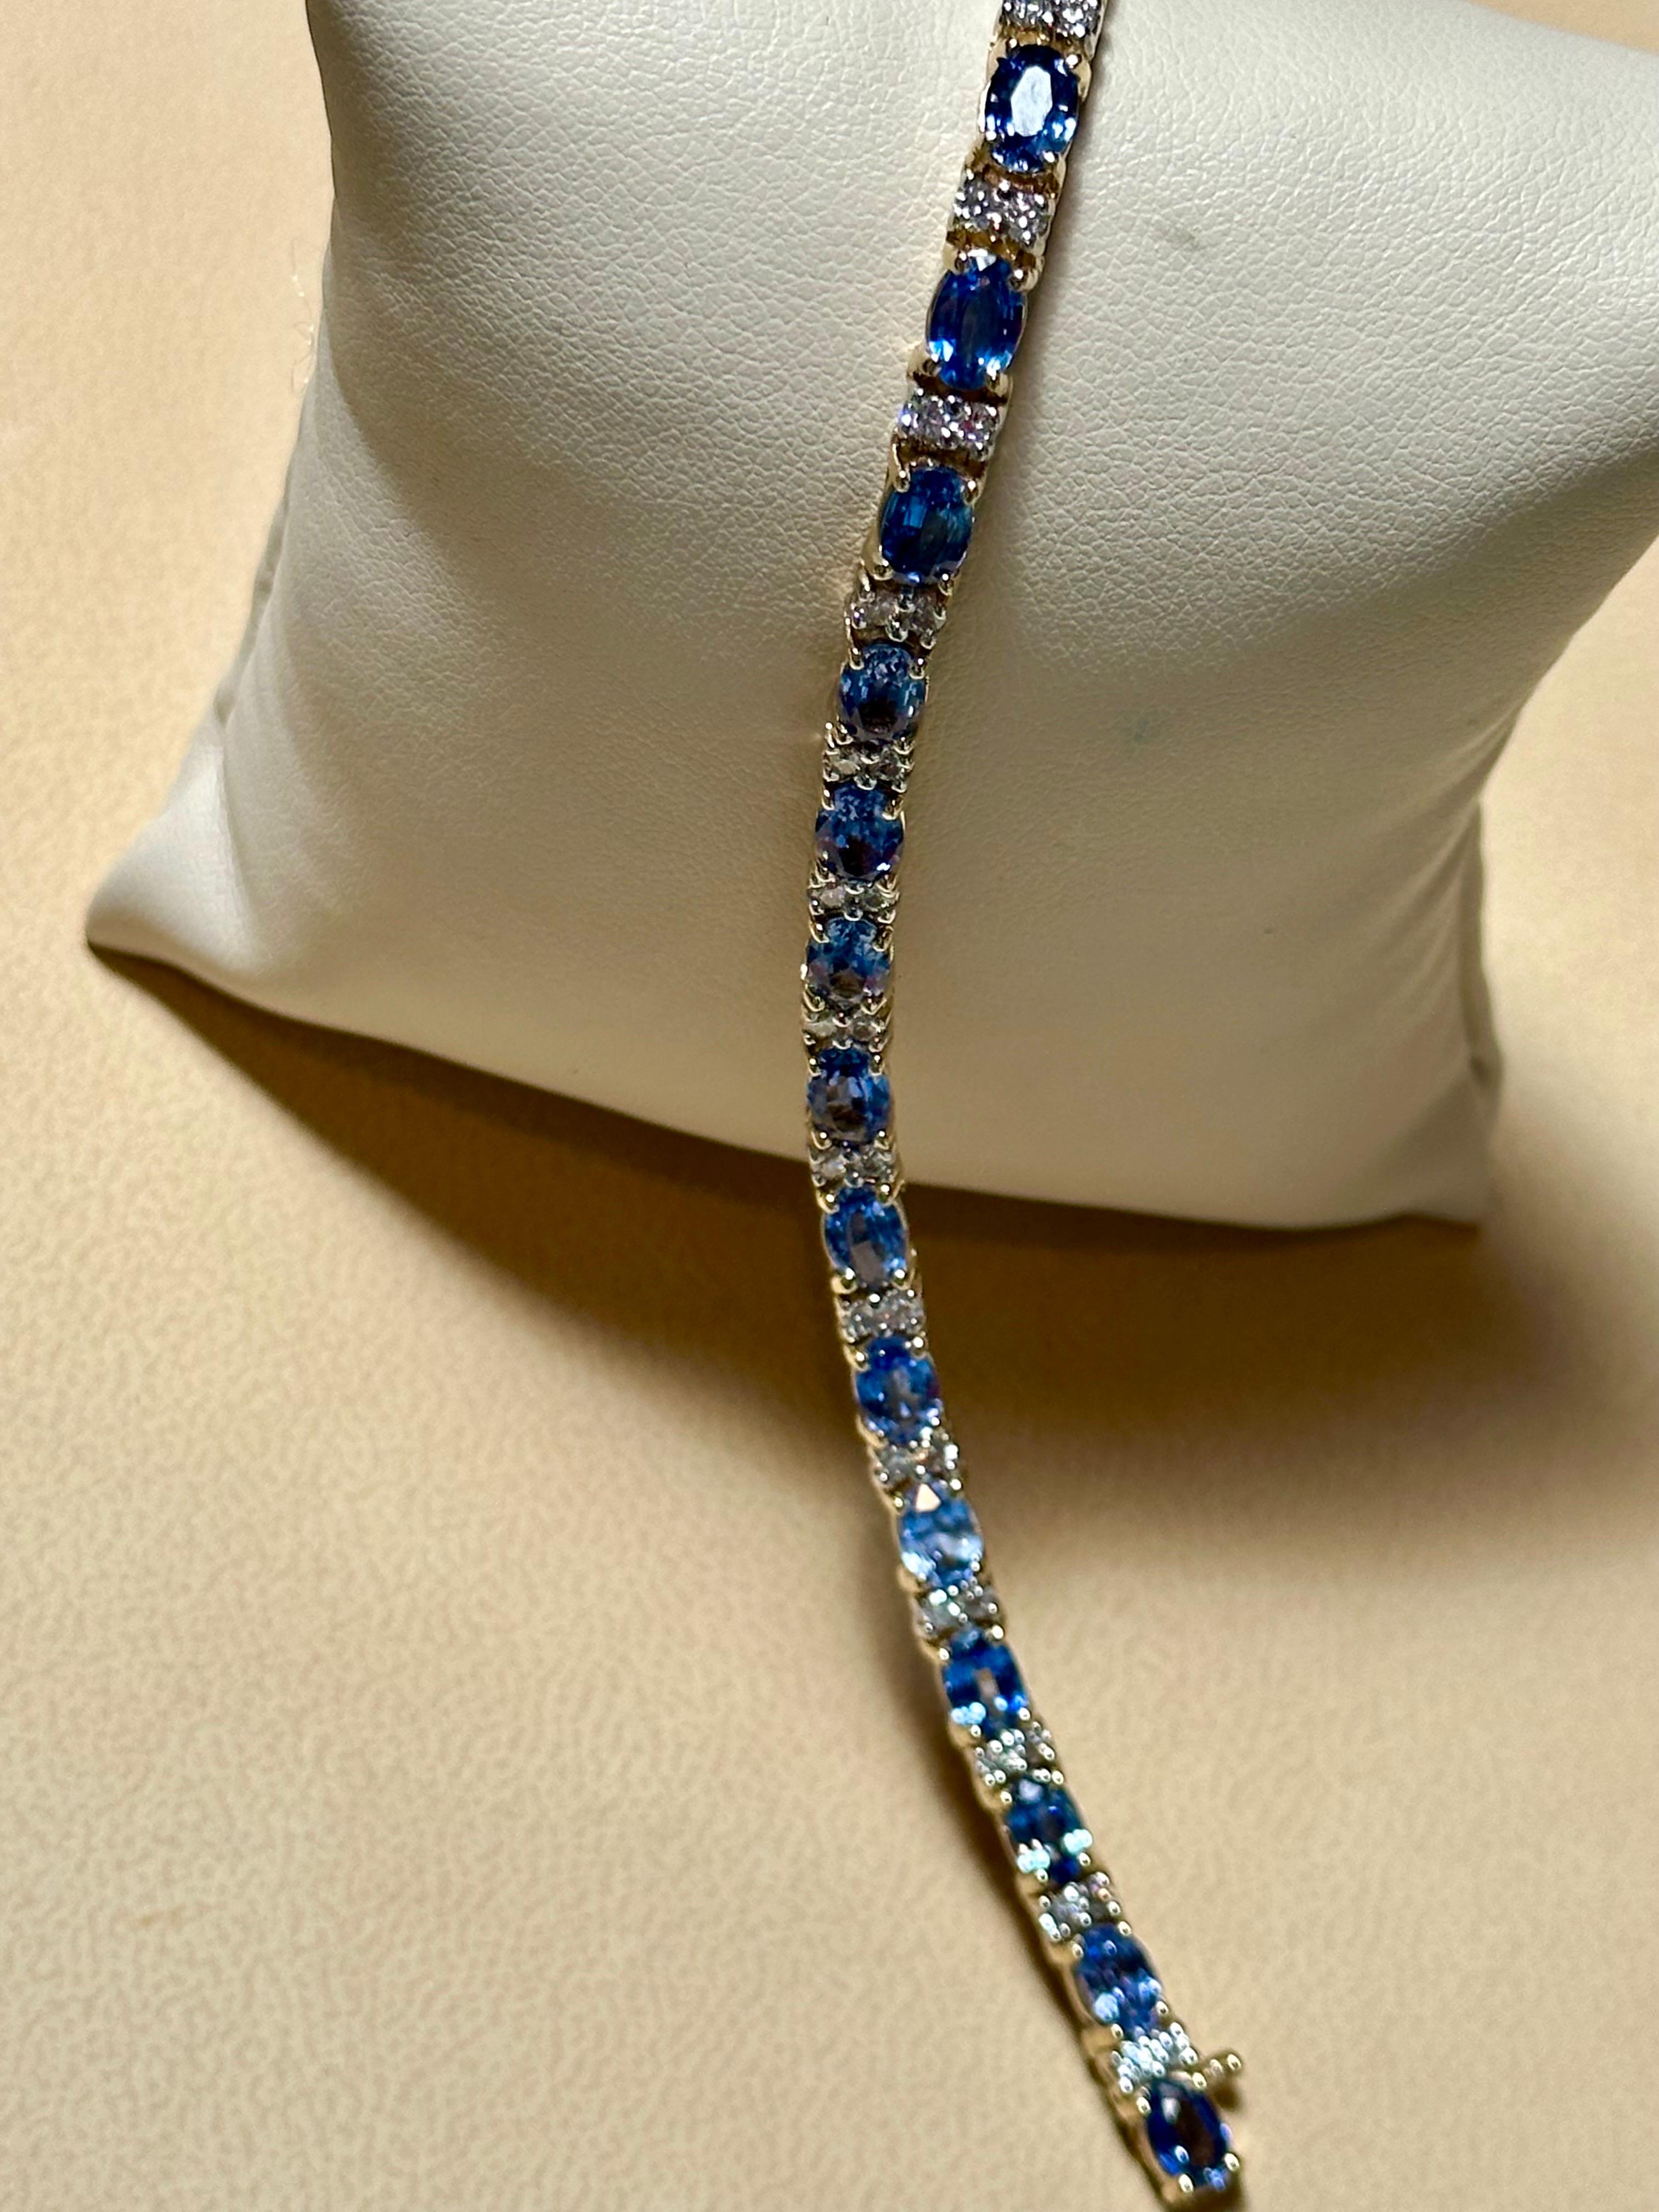 12 Carat Natural Sapphire & Diamond Cocktail Tennis Bracelet 14 Kt Yellow Gold In New Condition For Sale In New York, NY